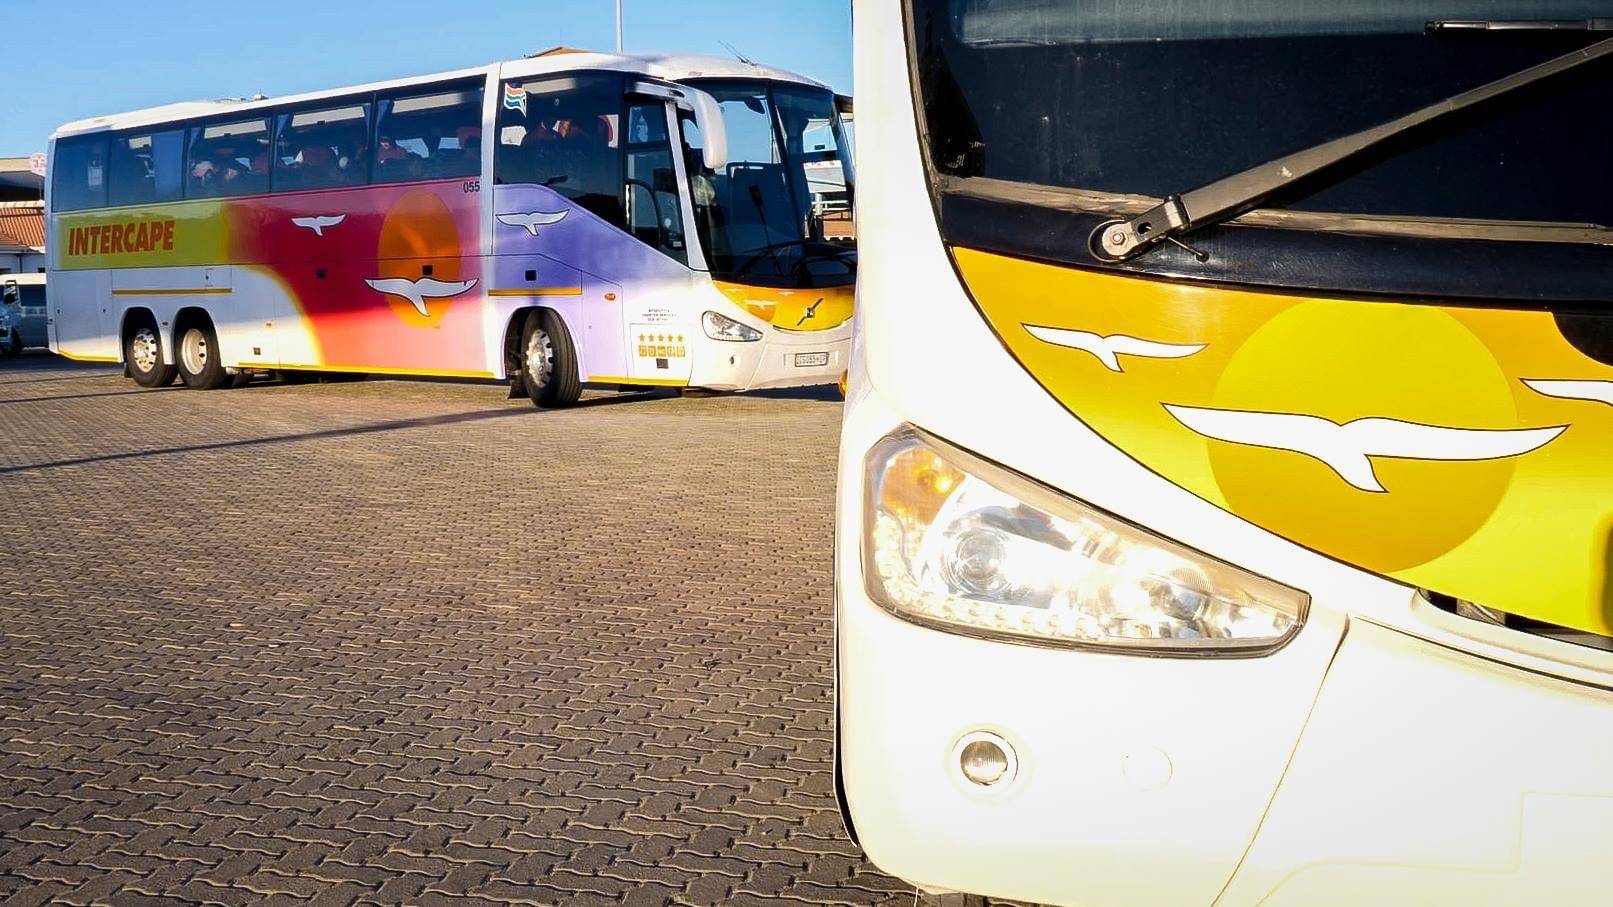 Intercape bus driver wounded in yet another shooting, drives himself to safety